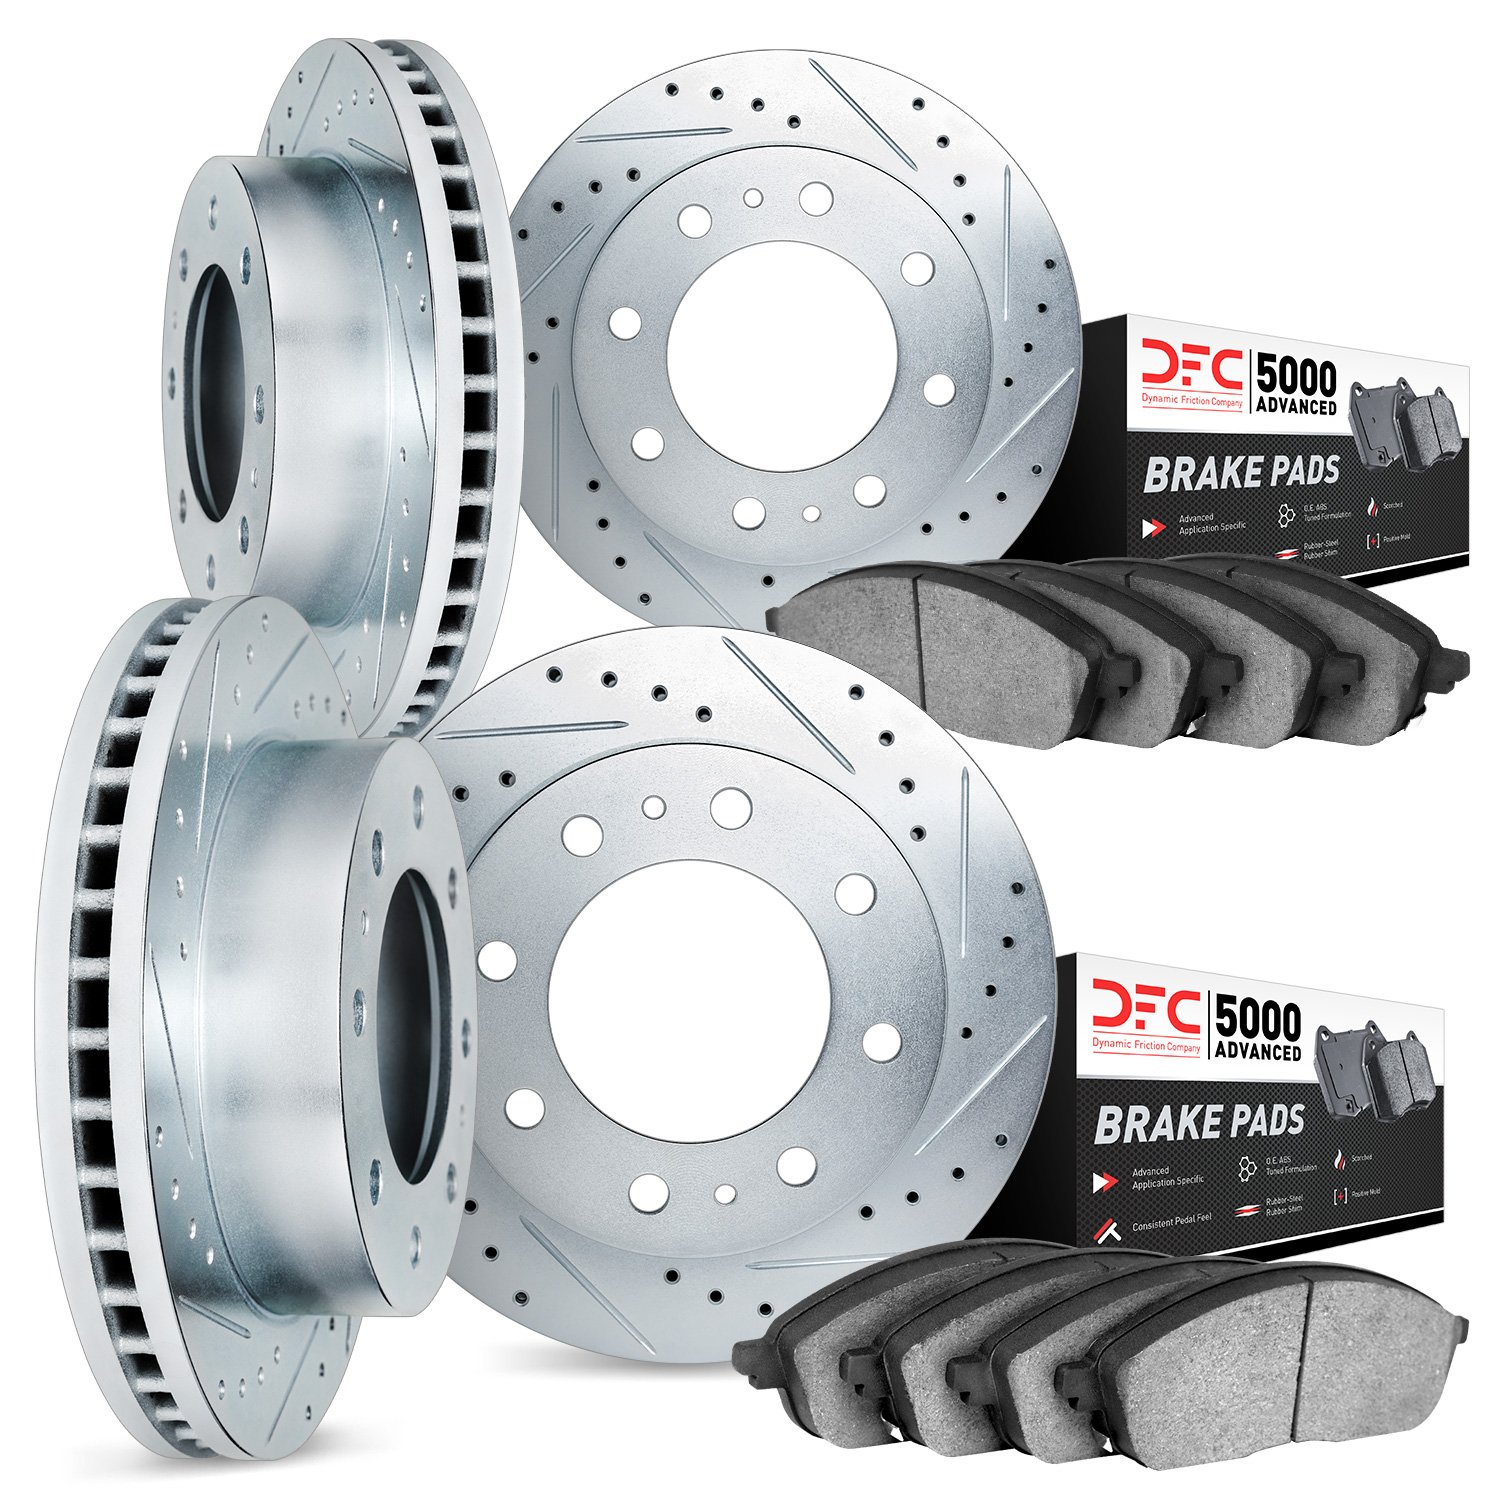 7504-54367 Drilled/Slotted Brake Rotors w/5000 Advanced Brake Pads Kit [Silver], 2005-2007 Ford/Lincoln/Mercury/Mazda, Position: